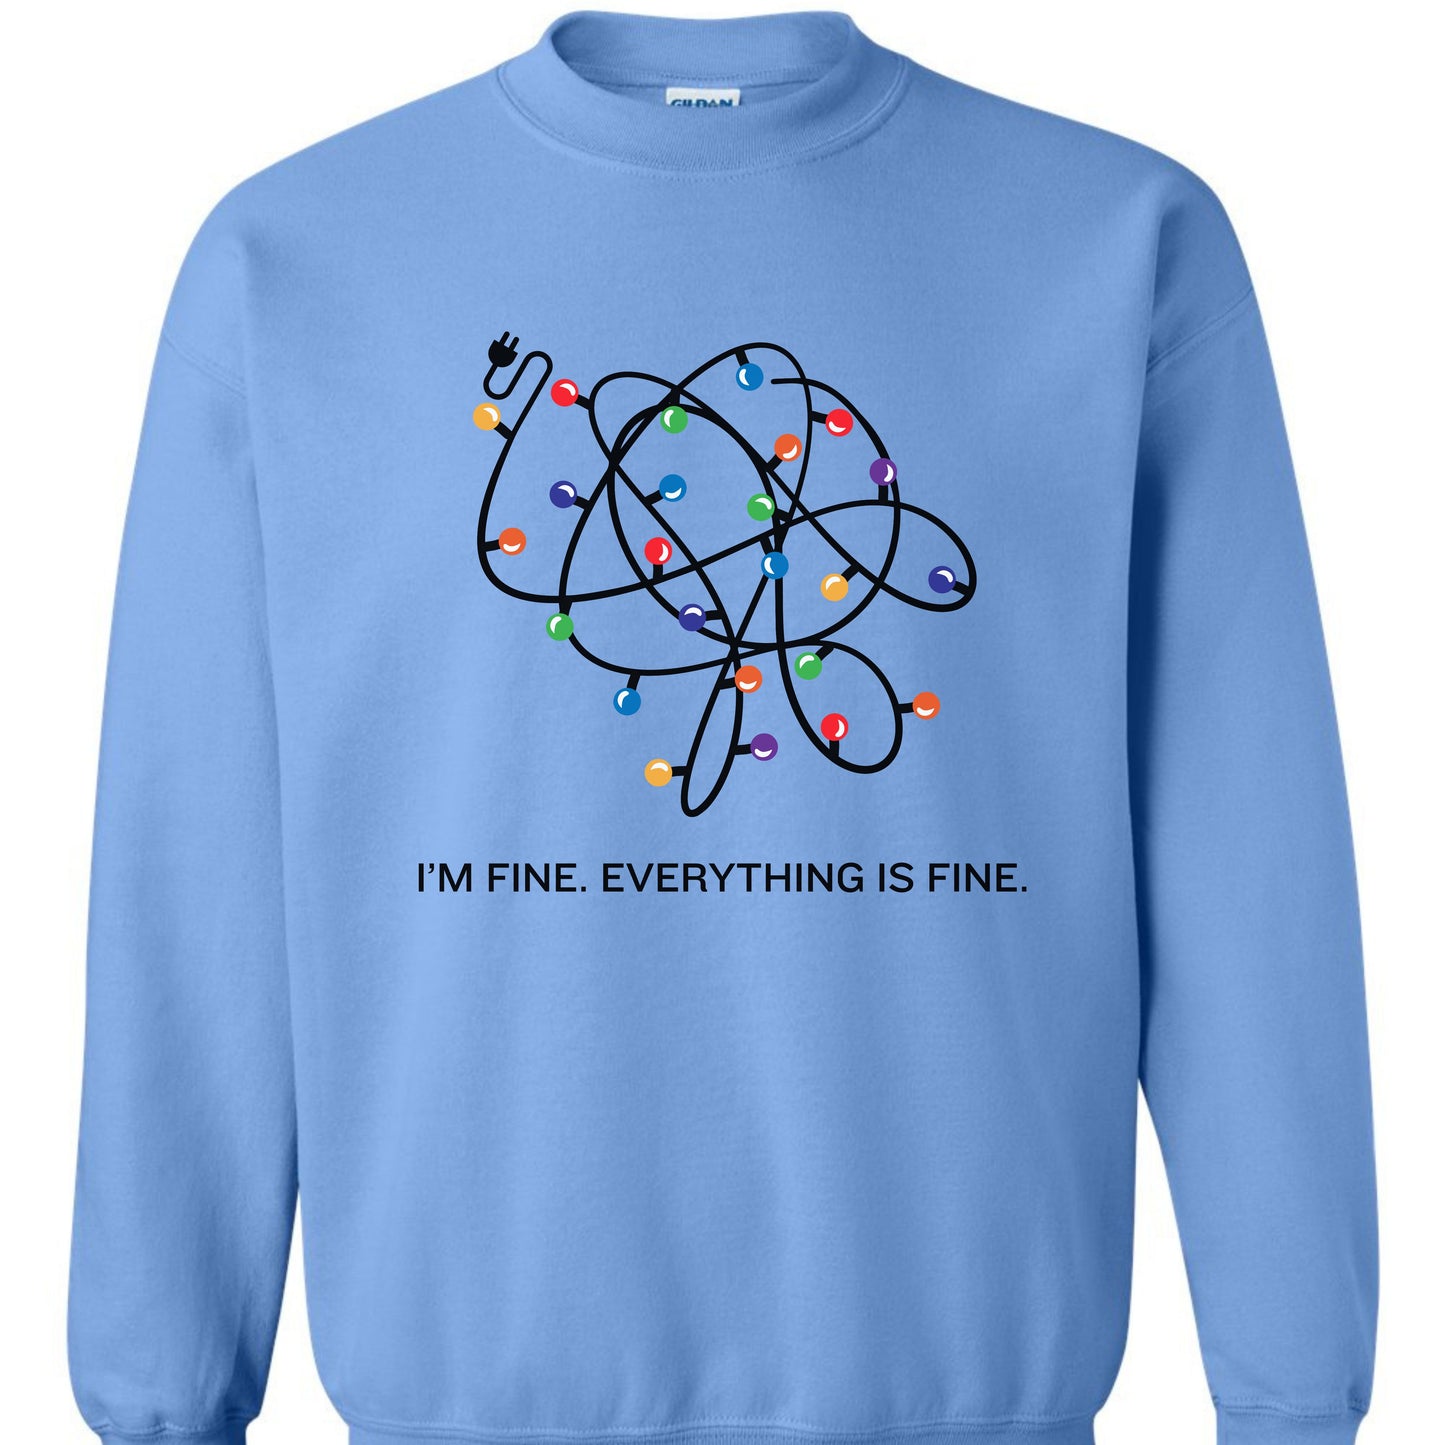 I'm fine, everything is fine Christmas Sweater